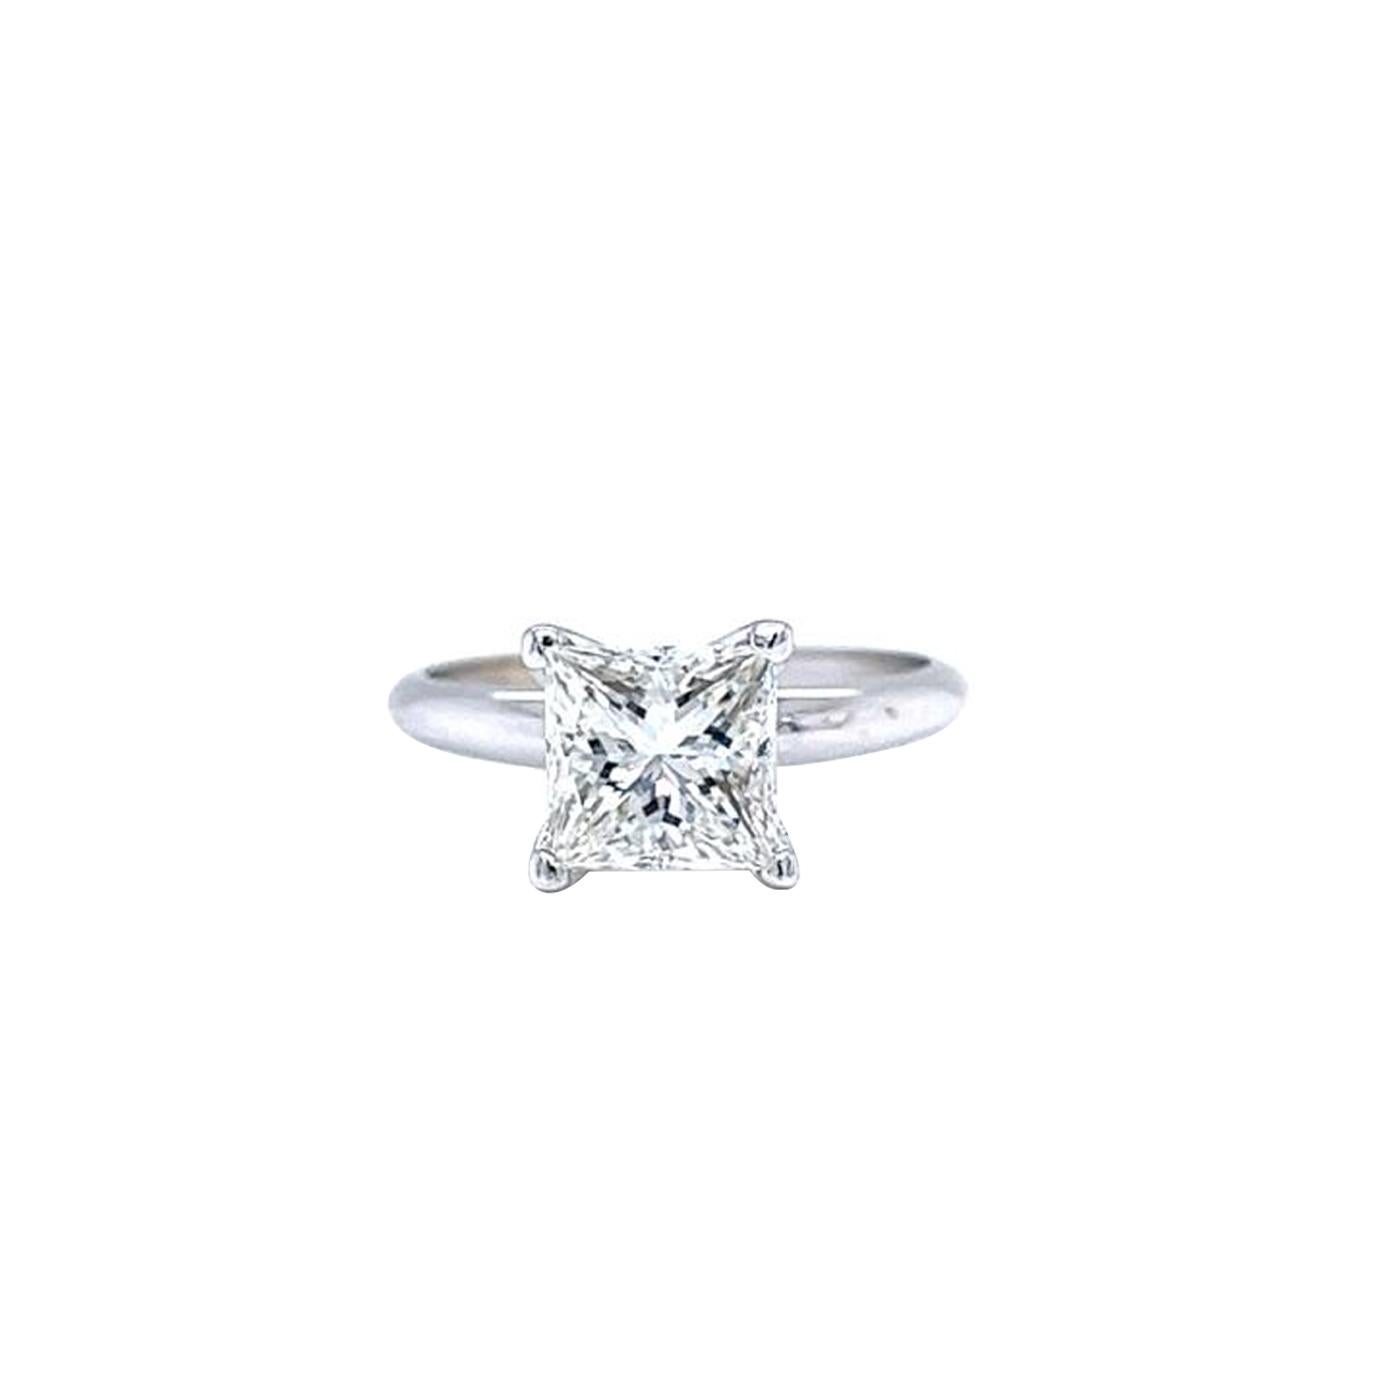 This lovely ring has a 2.01-carat Princes Cut Diamond Tiffany Style in 14K White Gold and measures 7.14 x 7.00 x 4.94 mm. It is GIA certified with Very Good polish and Good Symmetry and has a Princes Square Brilliant cut with a VS1 clarity grade and